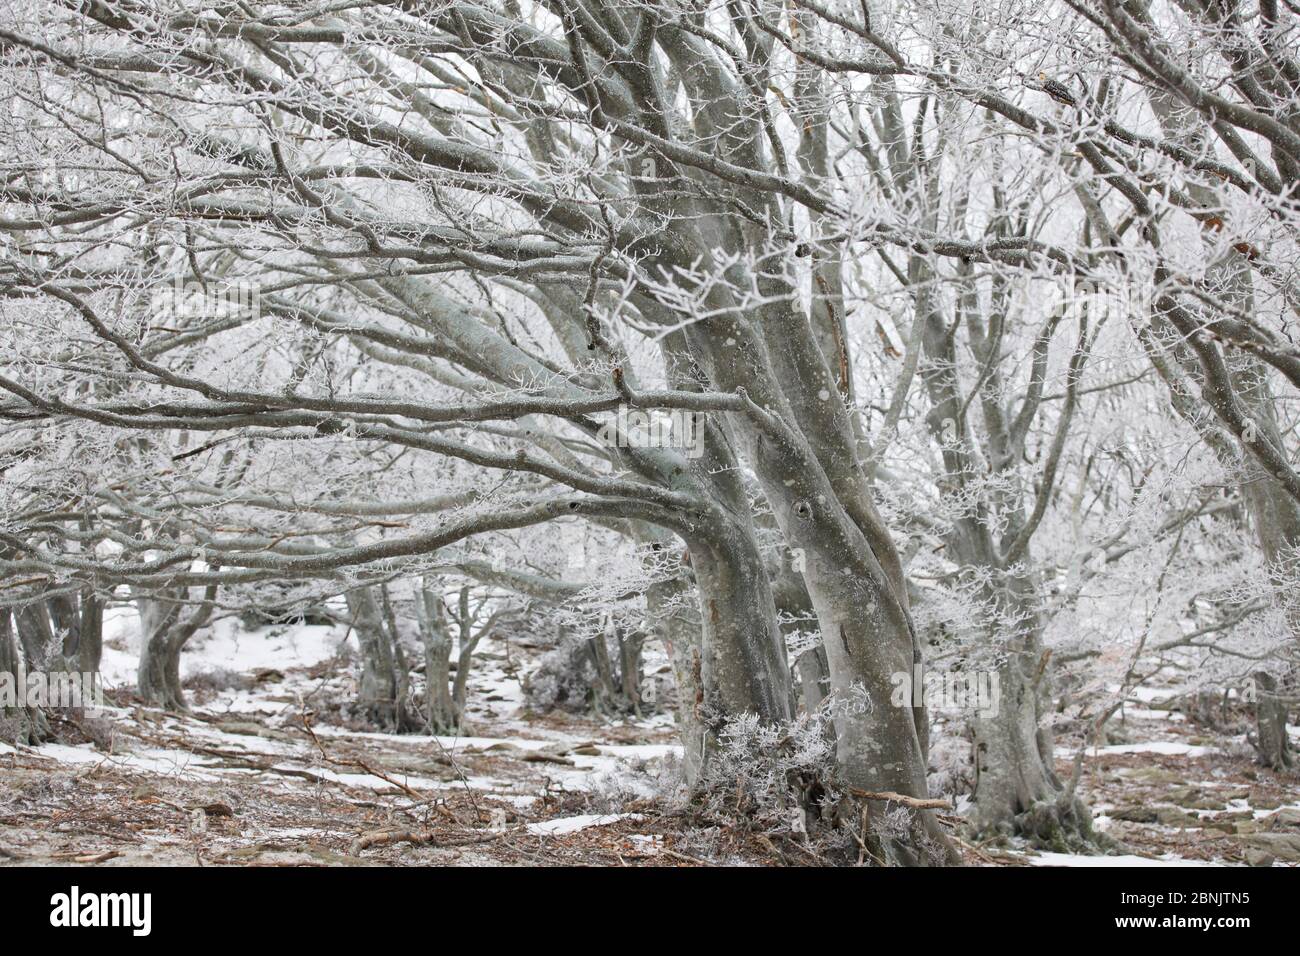 European Beech (Fagus sylvatica) trees in frost, with wind swept branches, Alberes, Pyrenees, France. February. Stock Photo